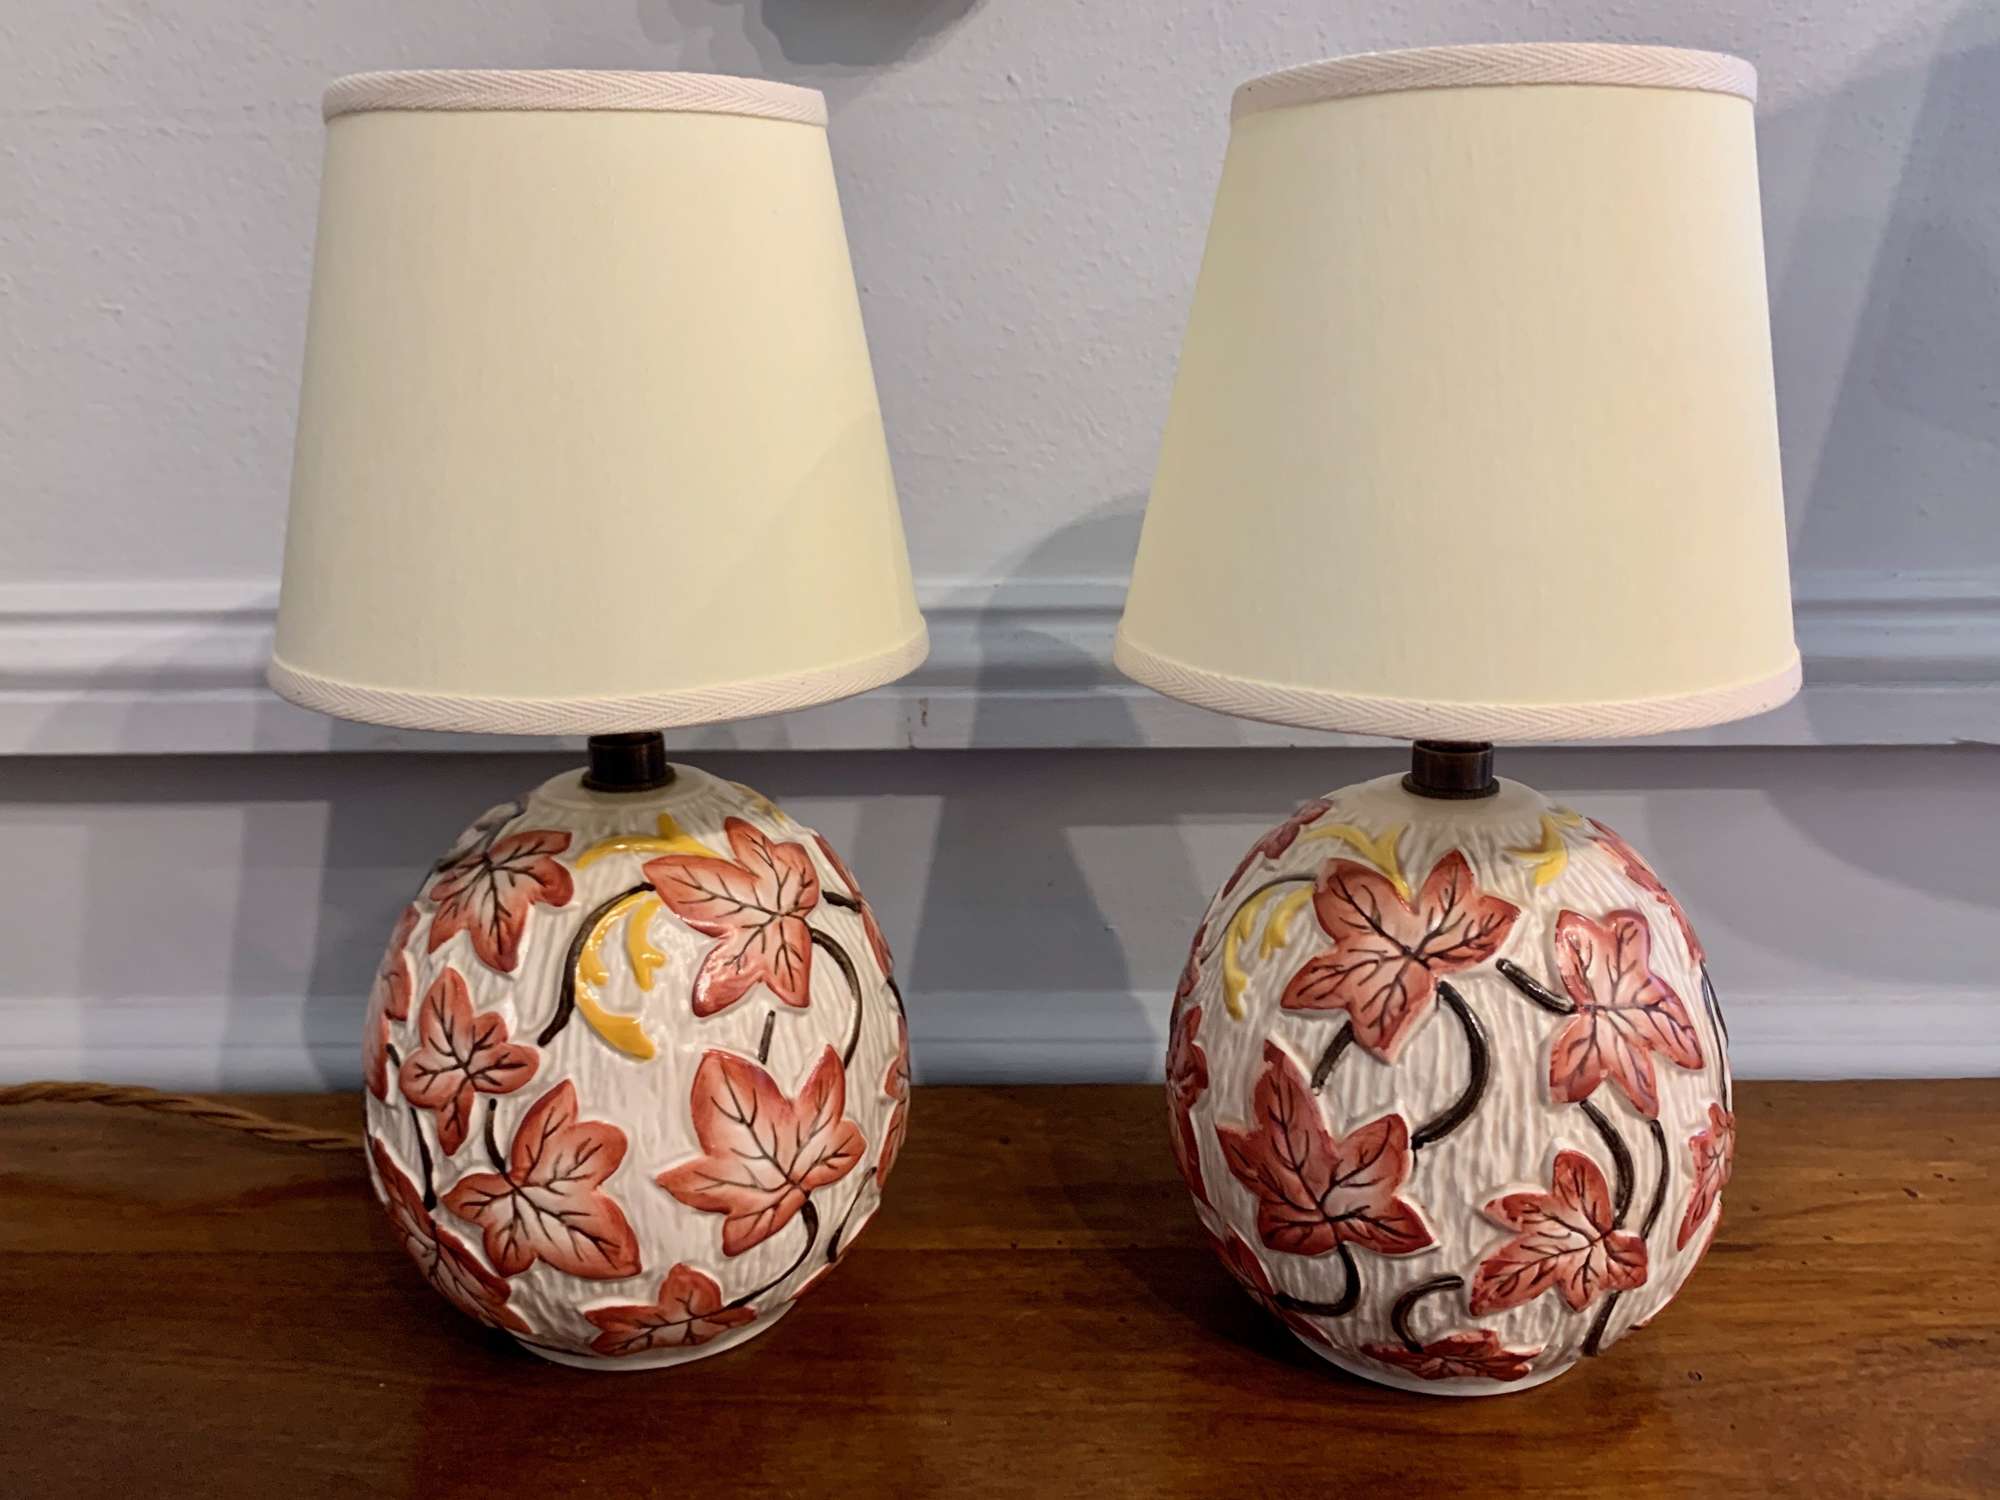 Pair of red ivy 1950's bedside ceramic lamps